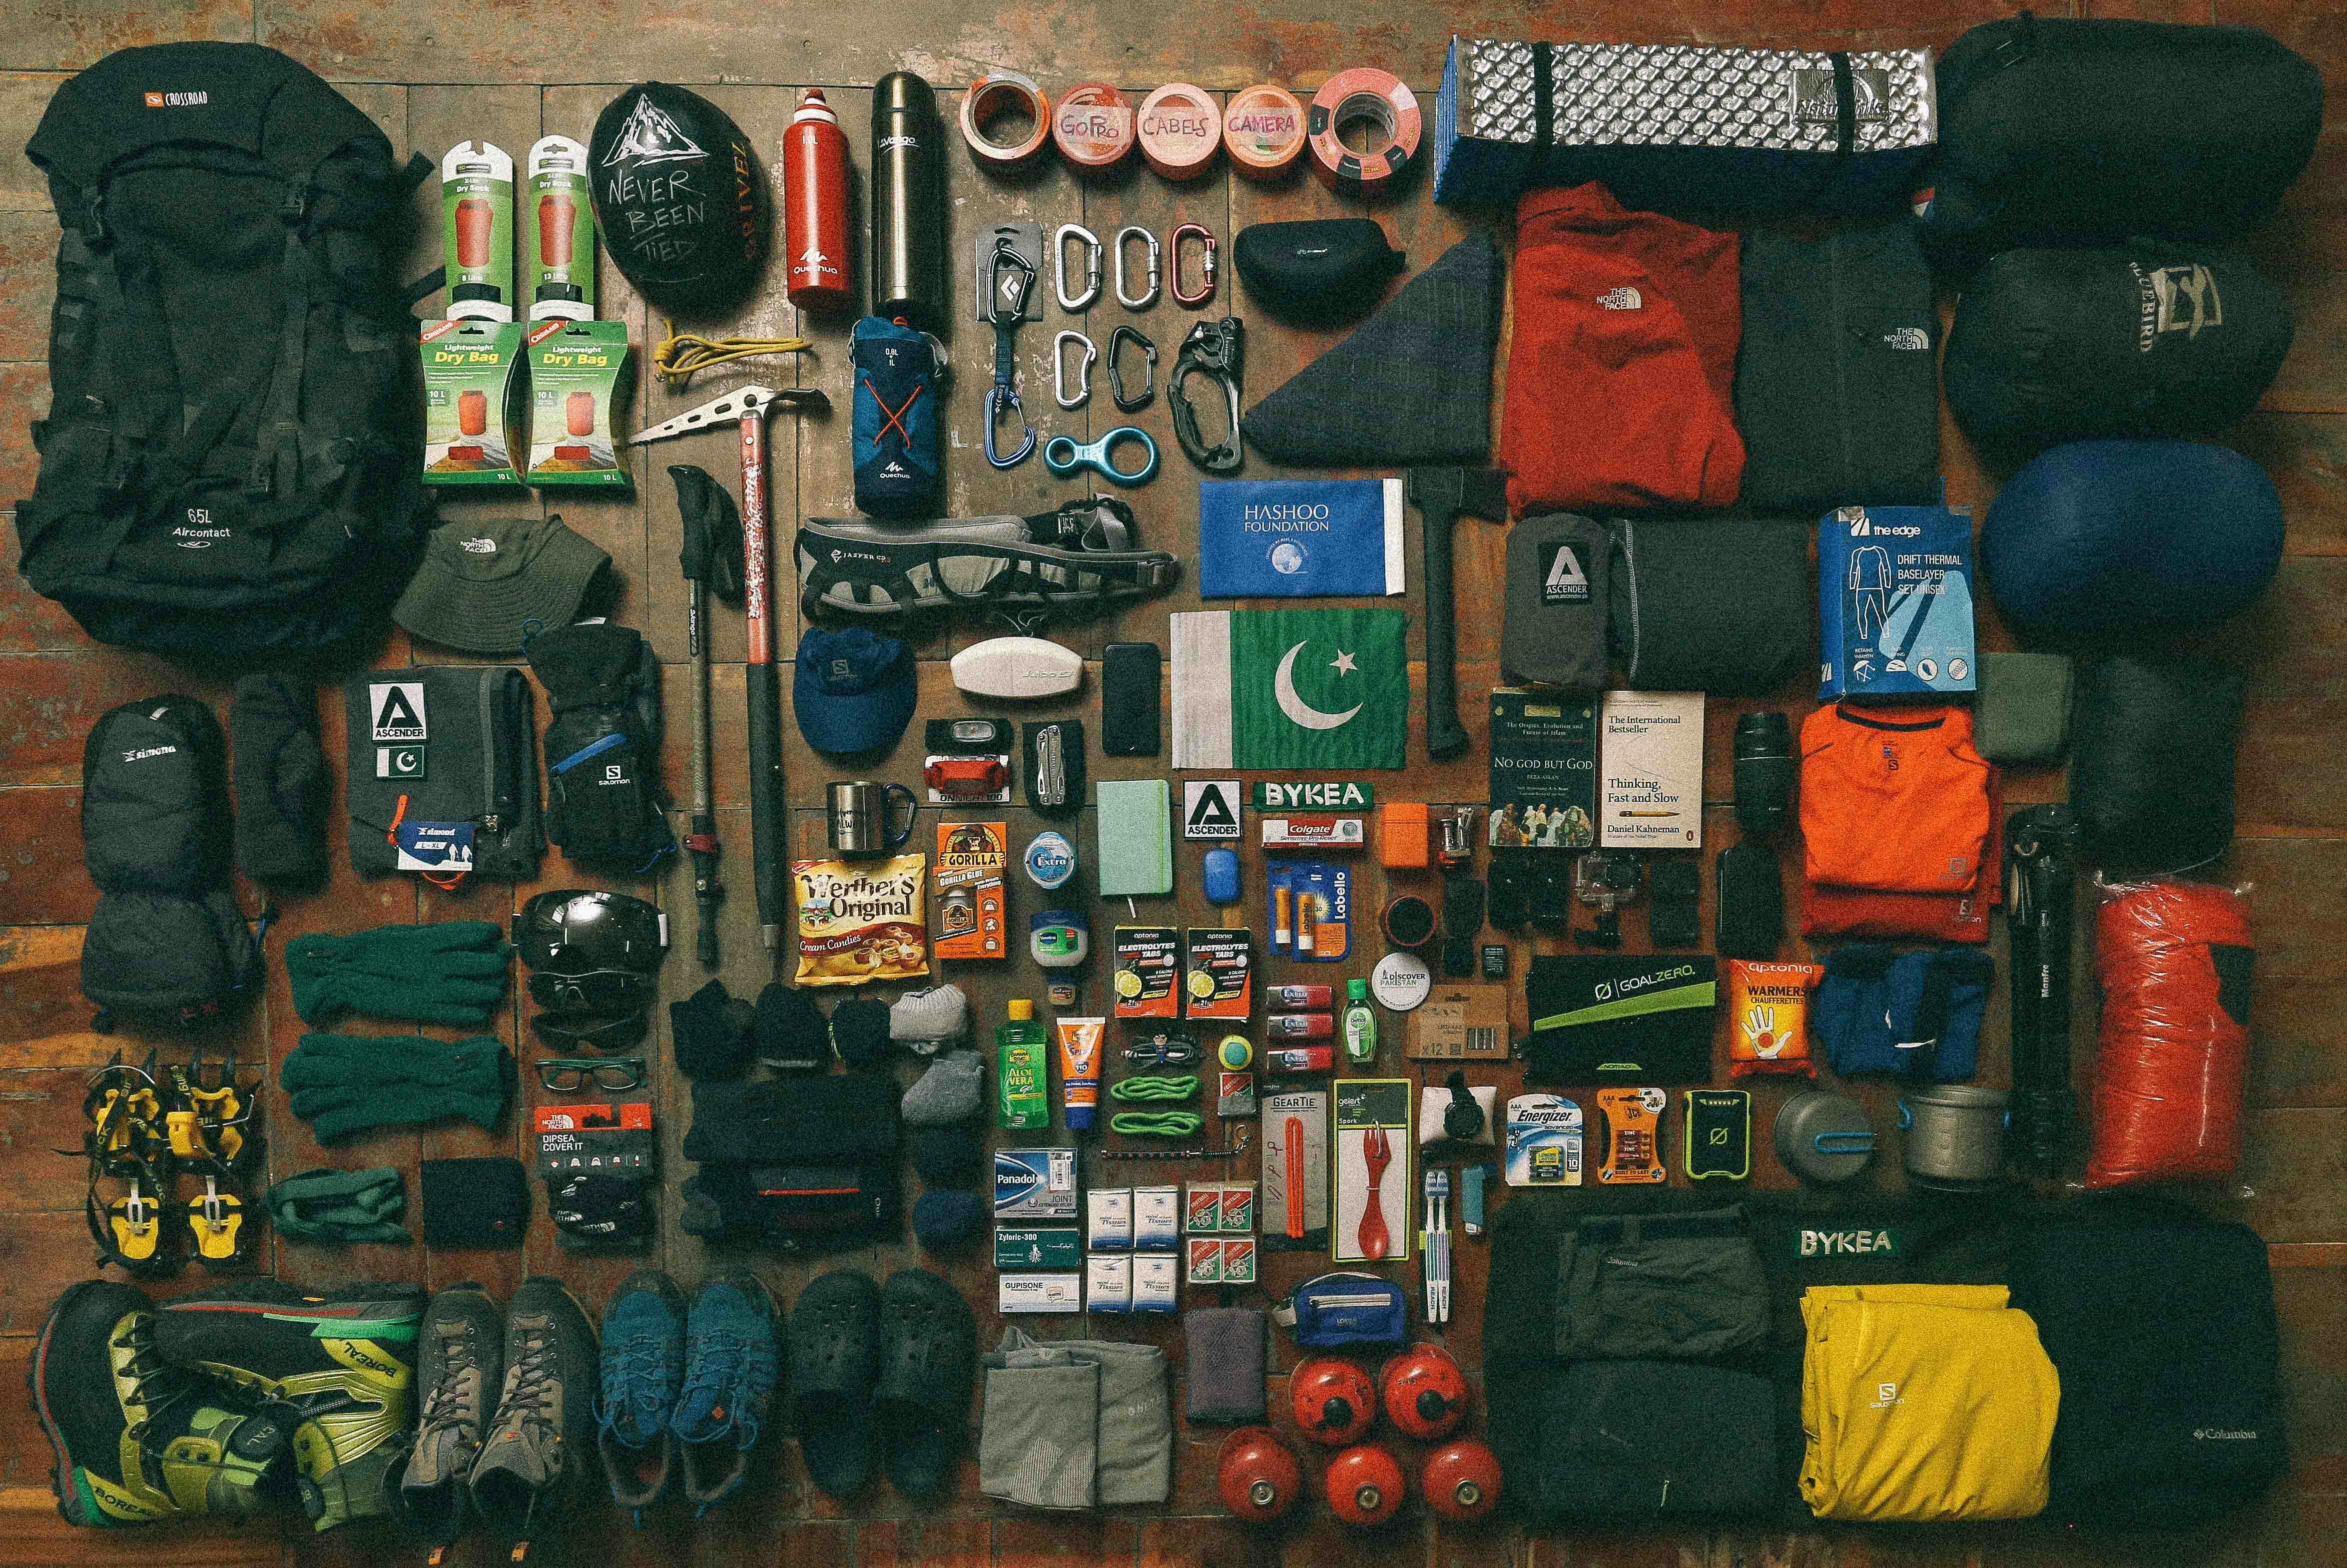 A layout of a variety of camping gear arranged neatly in a rectangle